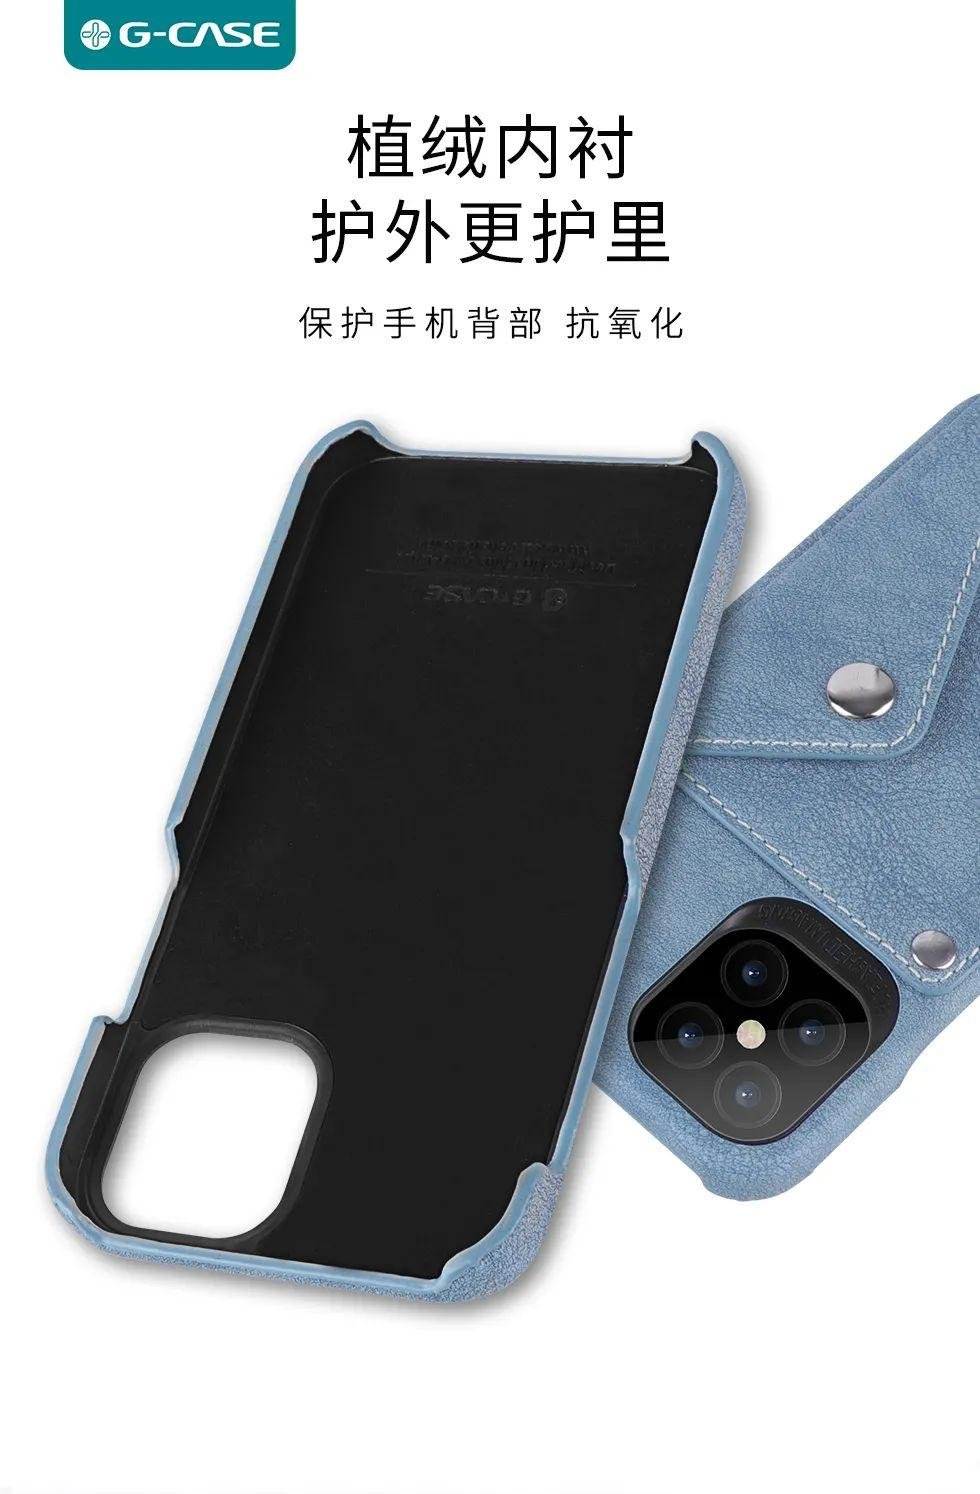 Distribute Carl Series Productive PU Cover Case for iPhone 12 5.4"6.1"6.7"or OEM 3